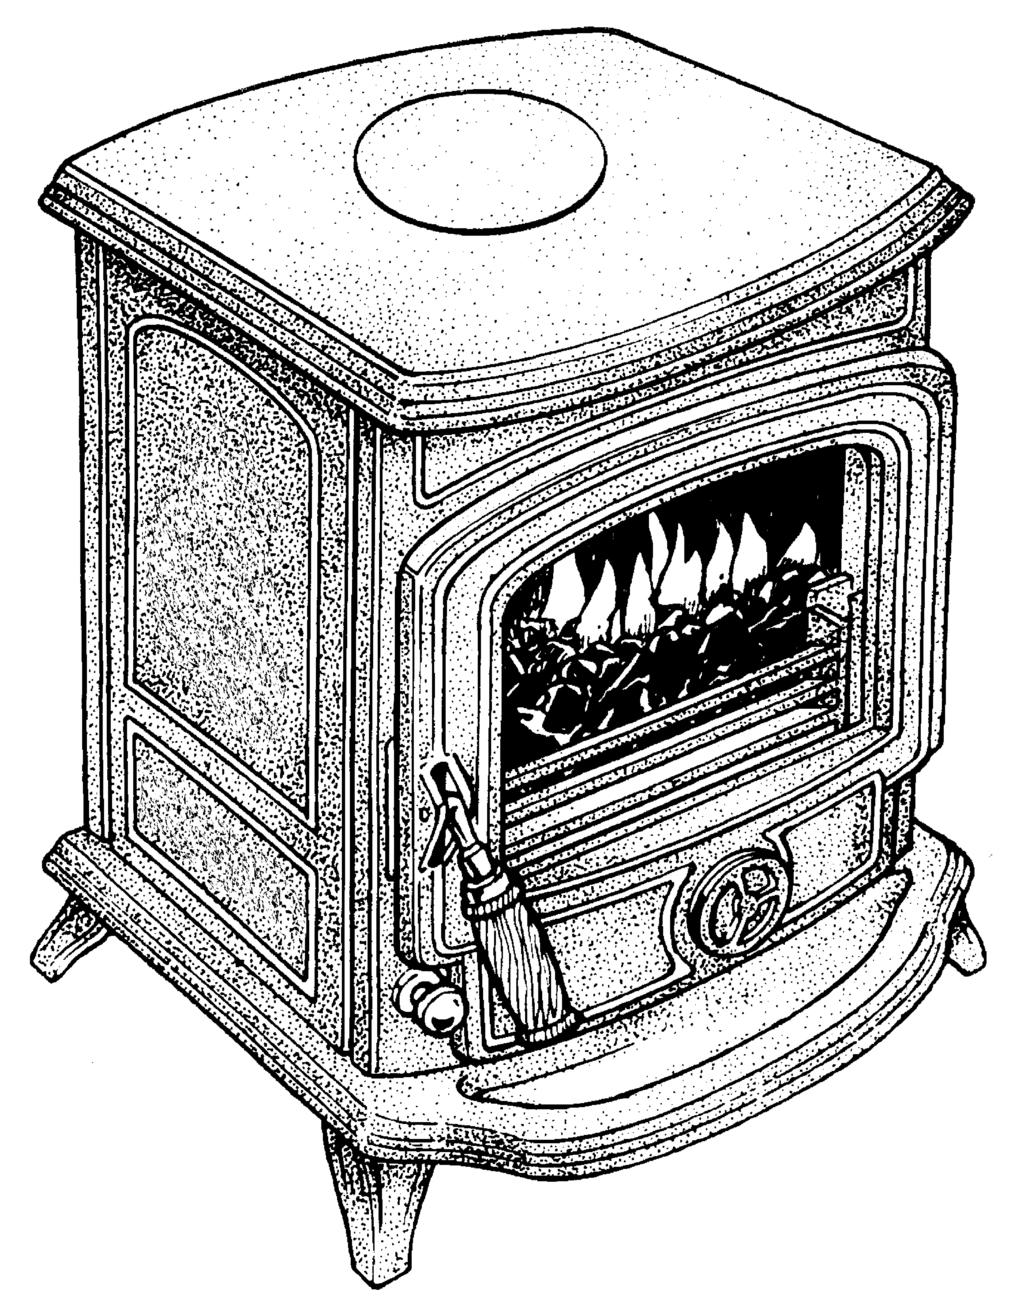 PLEASE RETAIN Oisin Solid Fuel Stove This appliance is hot while in operation and retains its heat for a long period of time after use.